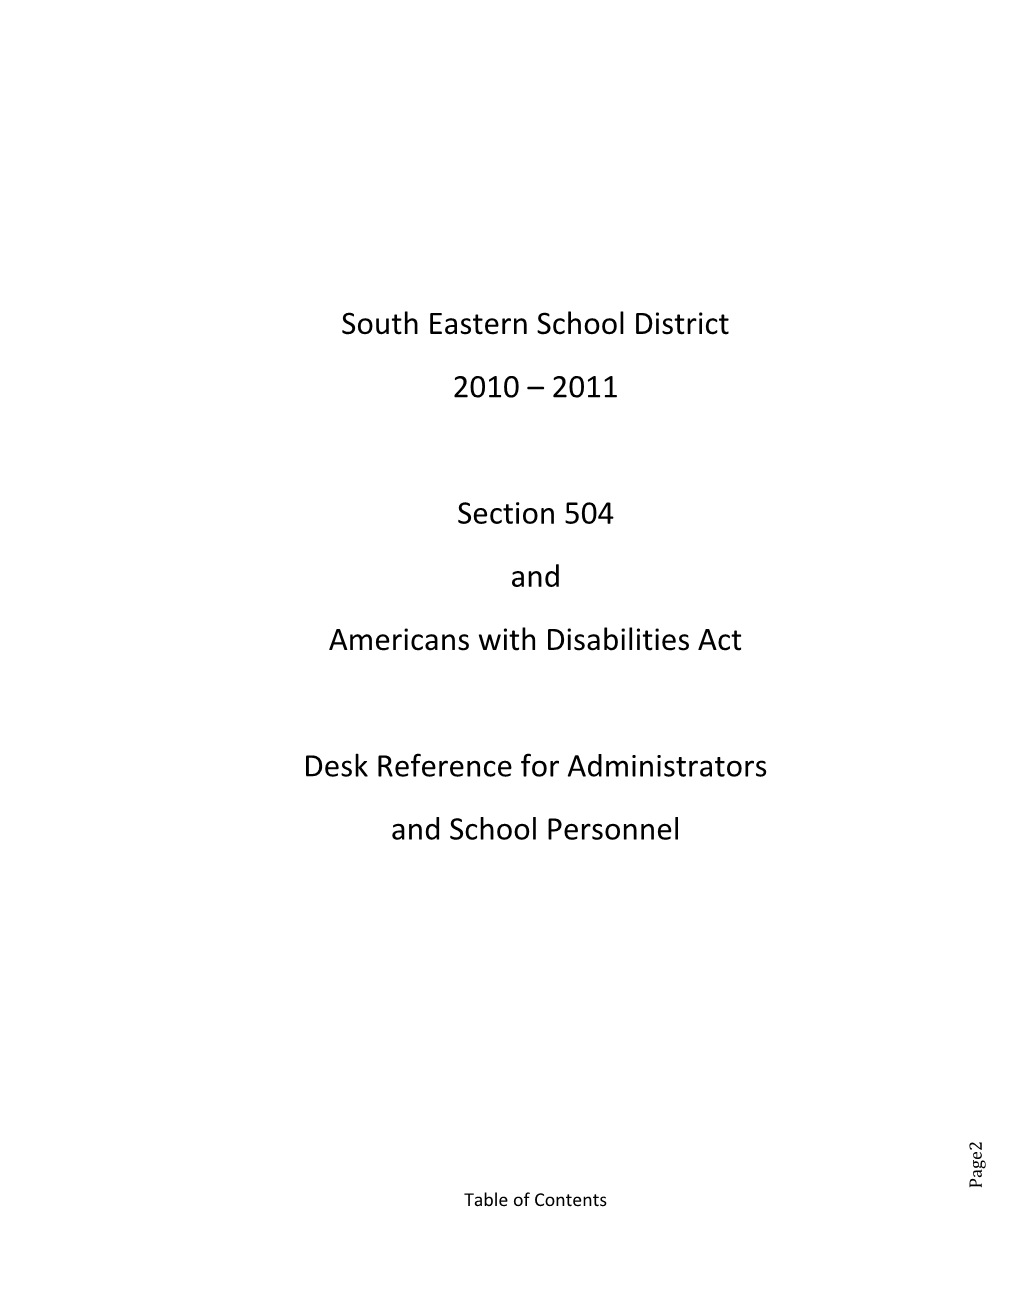 South Eastern School District